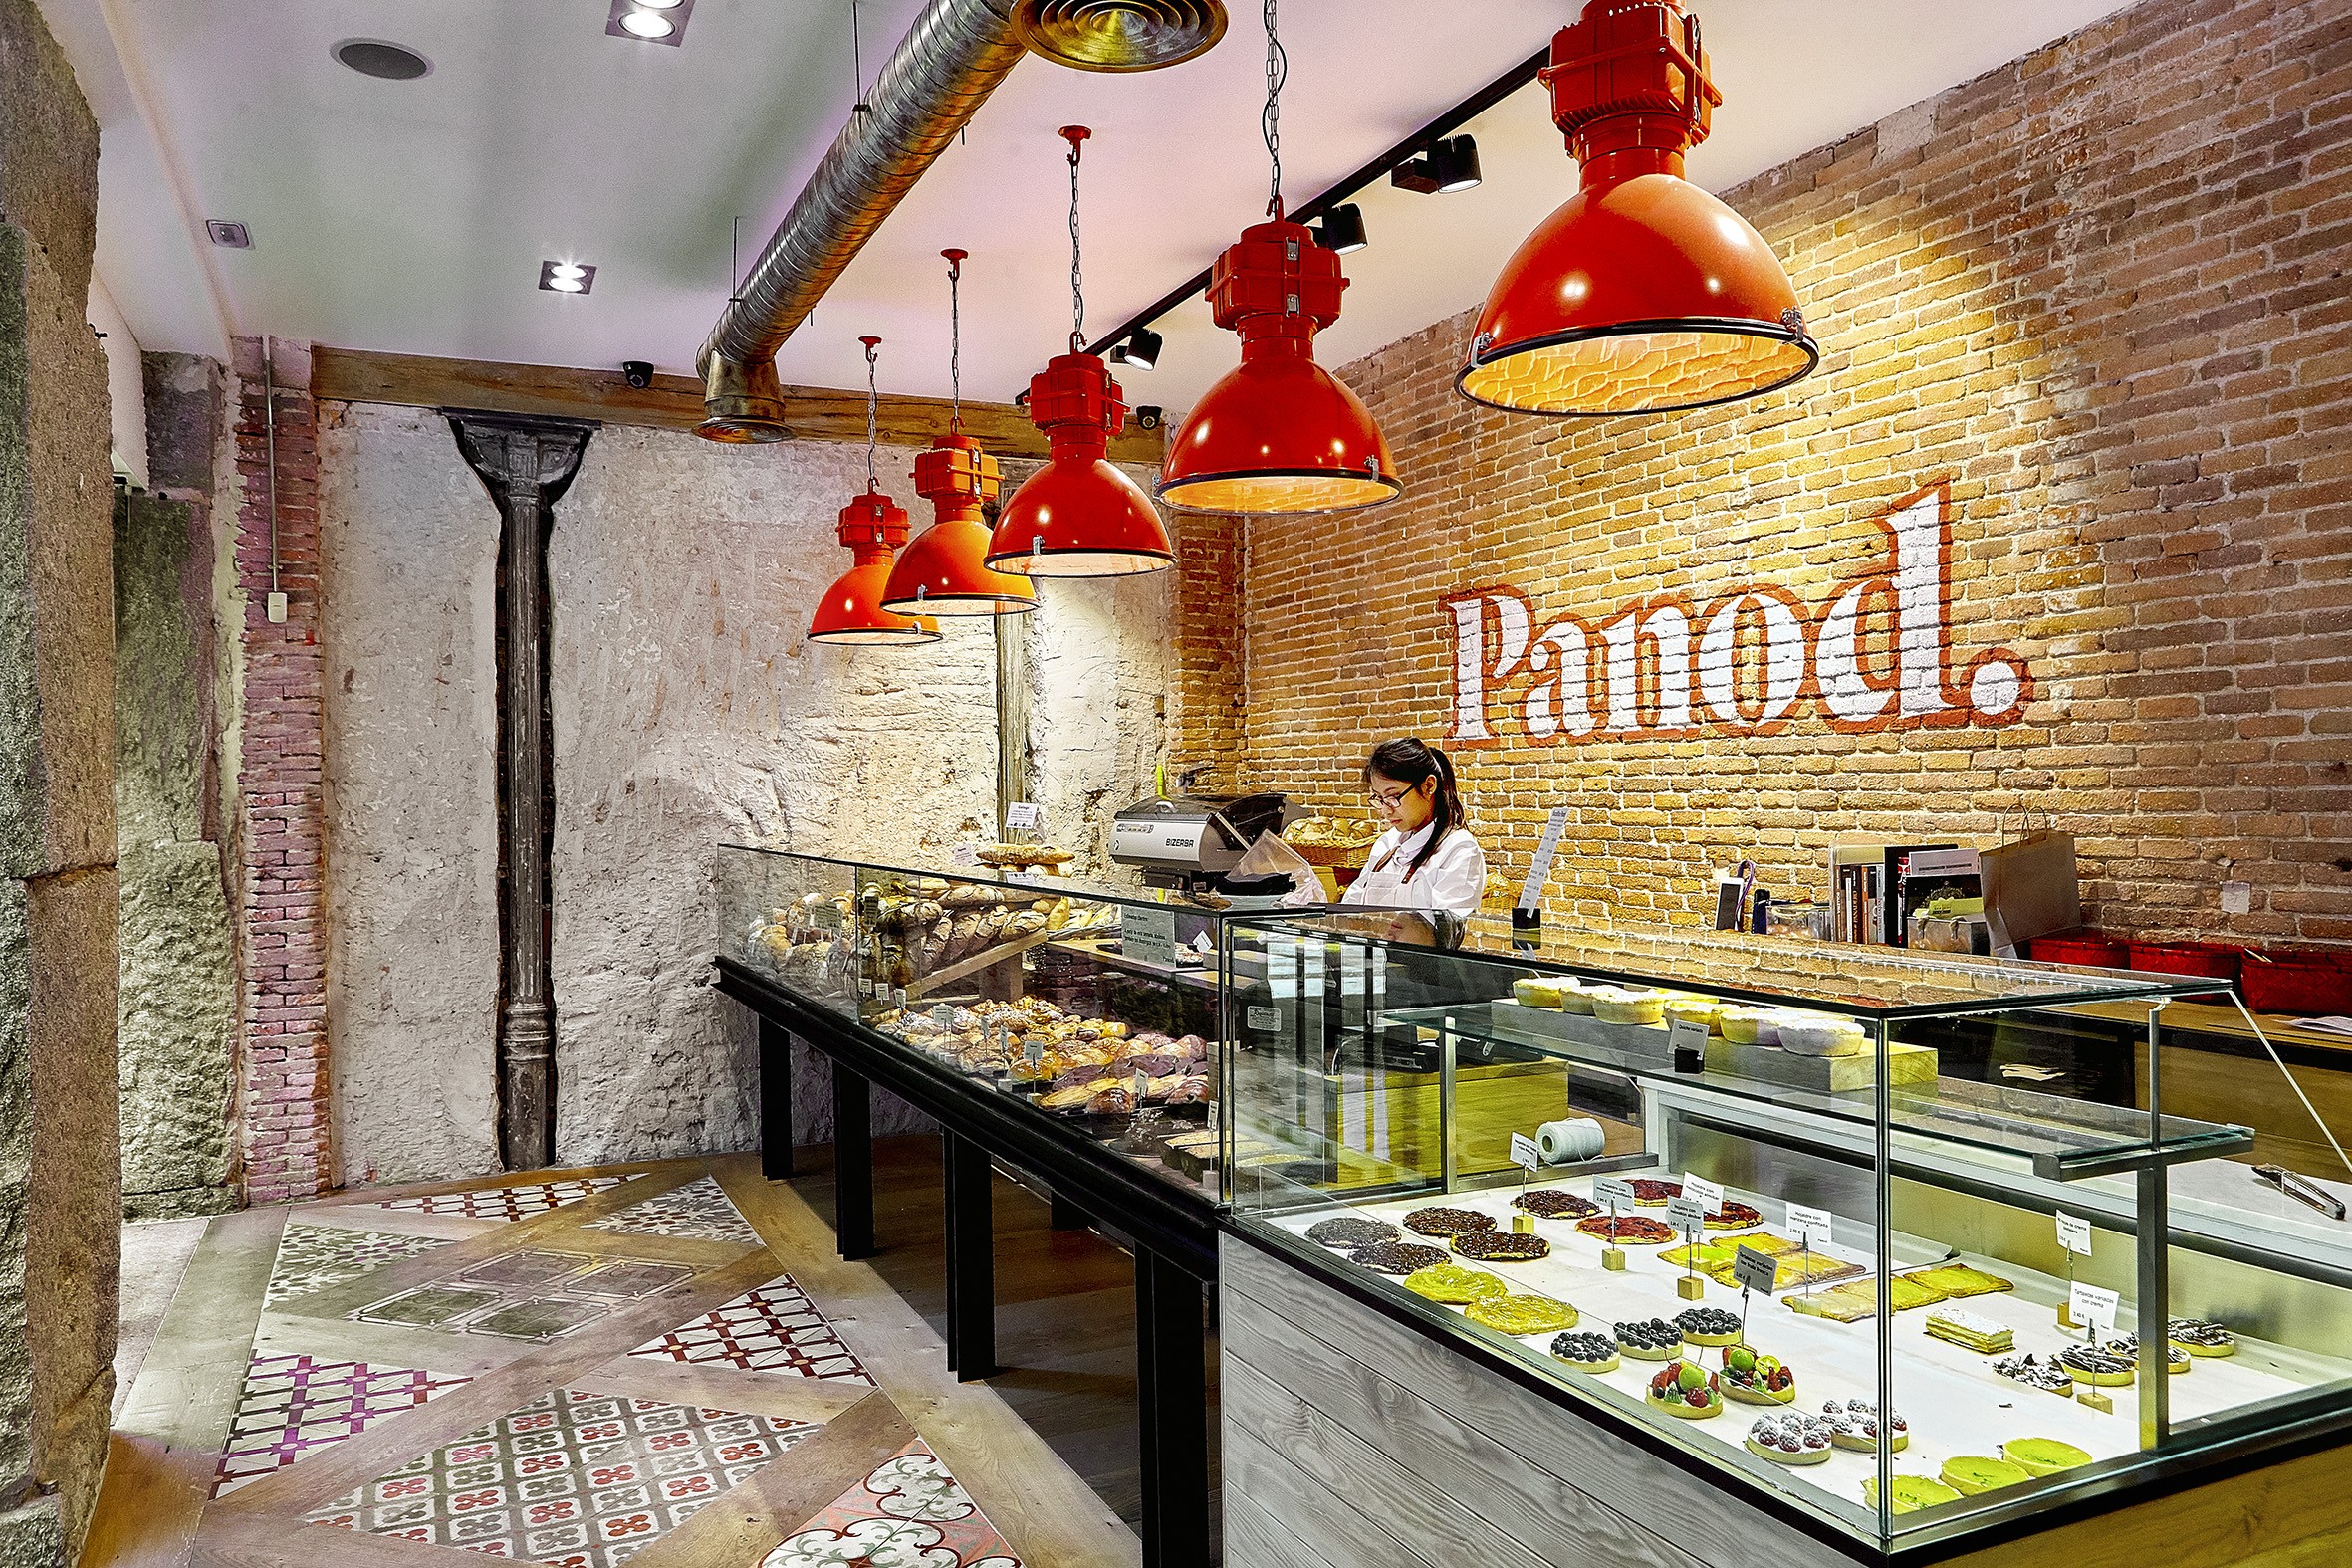 Panod, Cafe, Madrid, Spain: All year